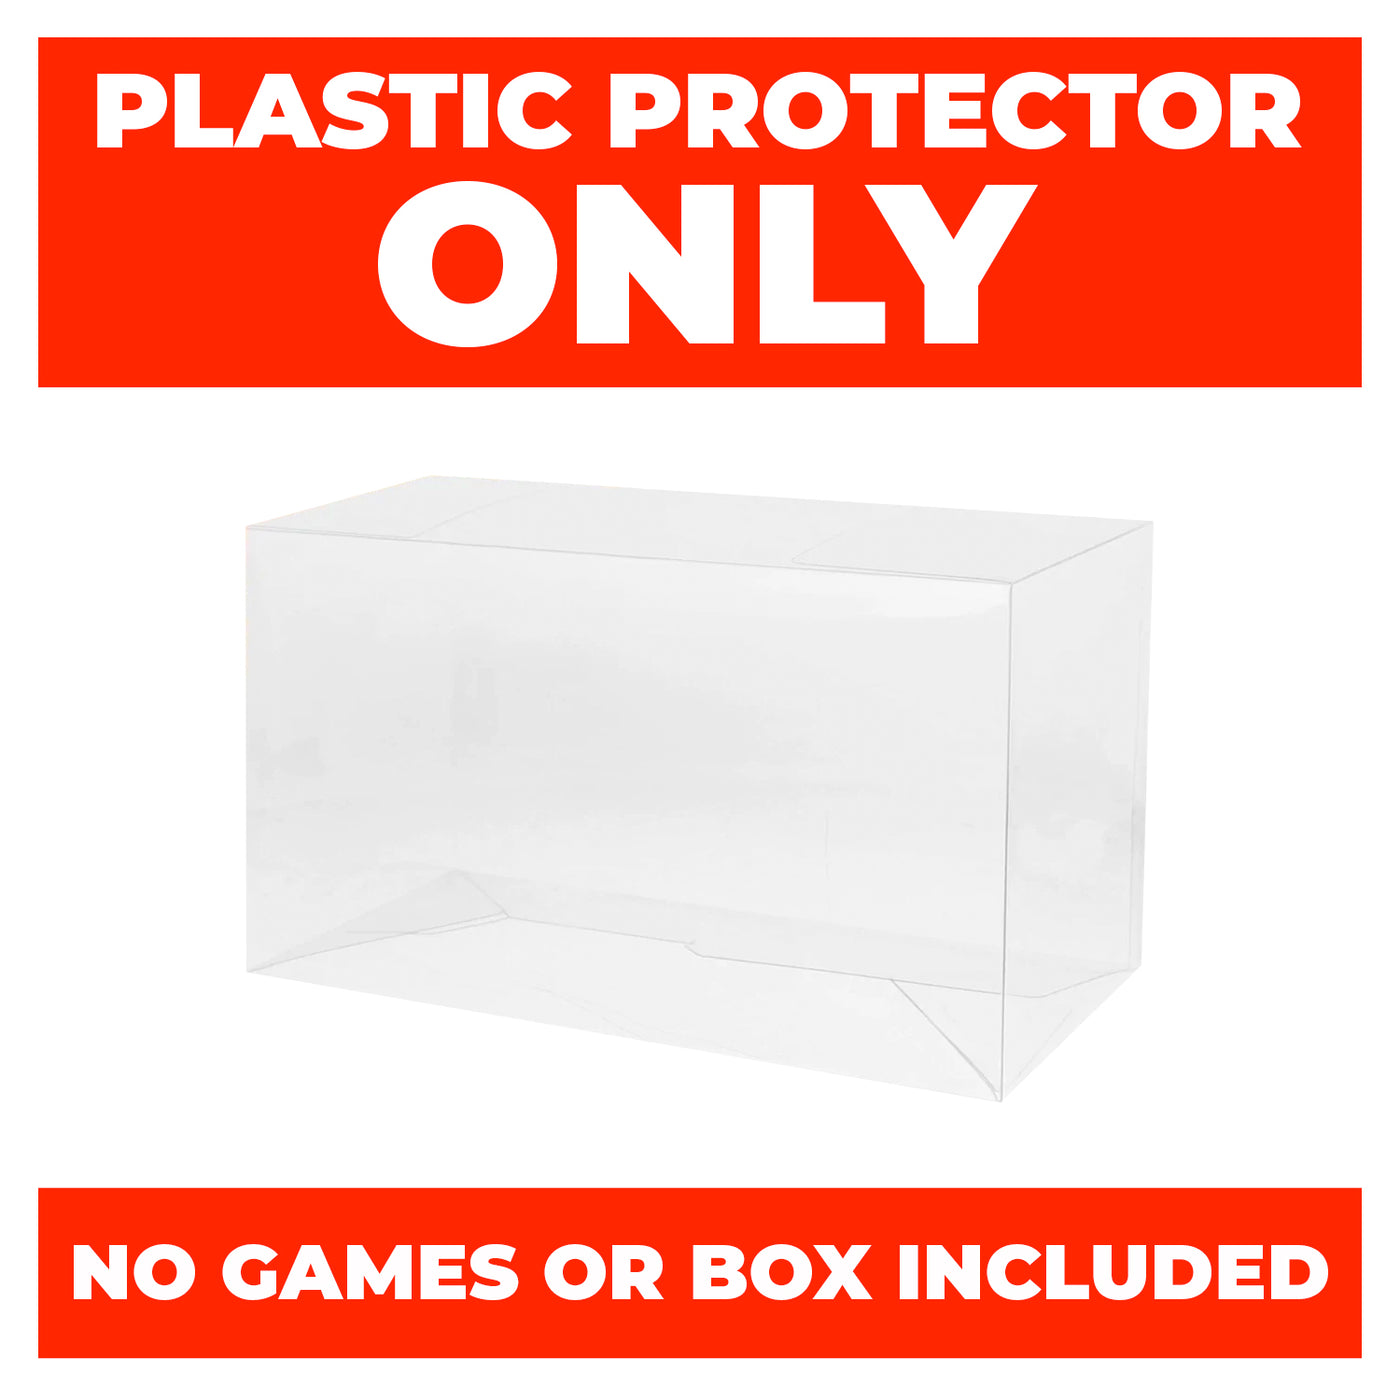 Plastic Protector for TMNT COWABUNGA COLLECTION SE Video Game Box 50mm thick on The Pop Protector Guide by Display Geek